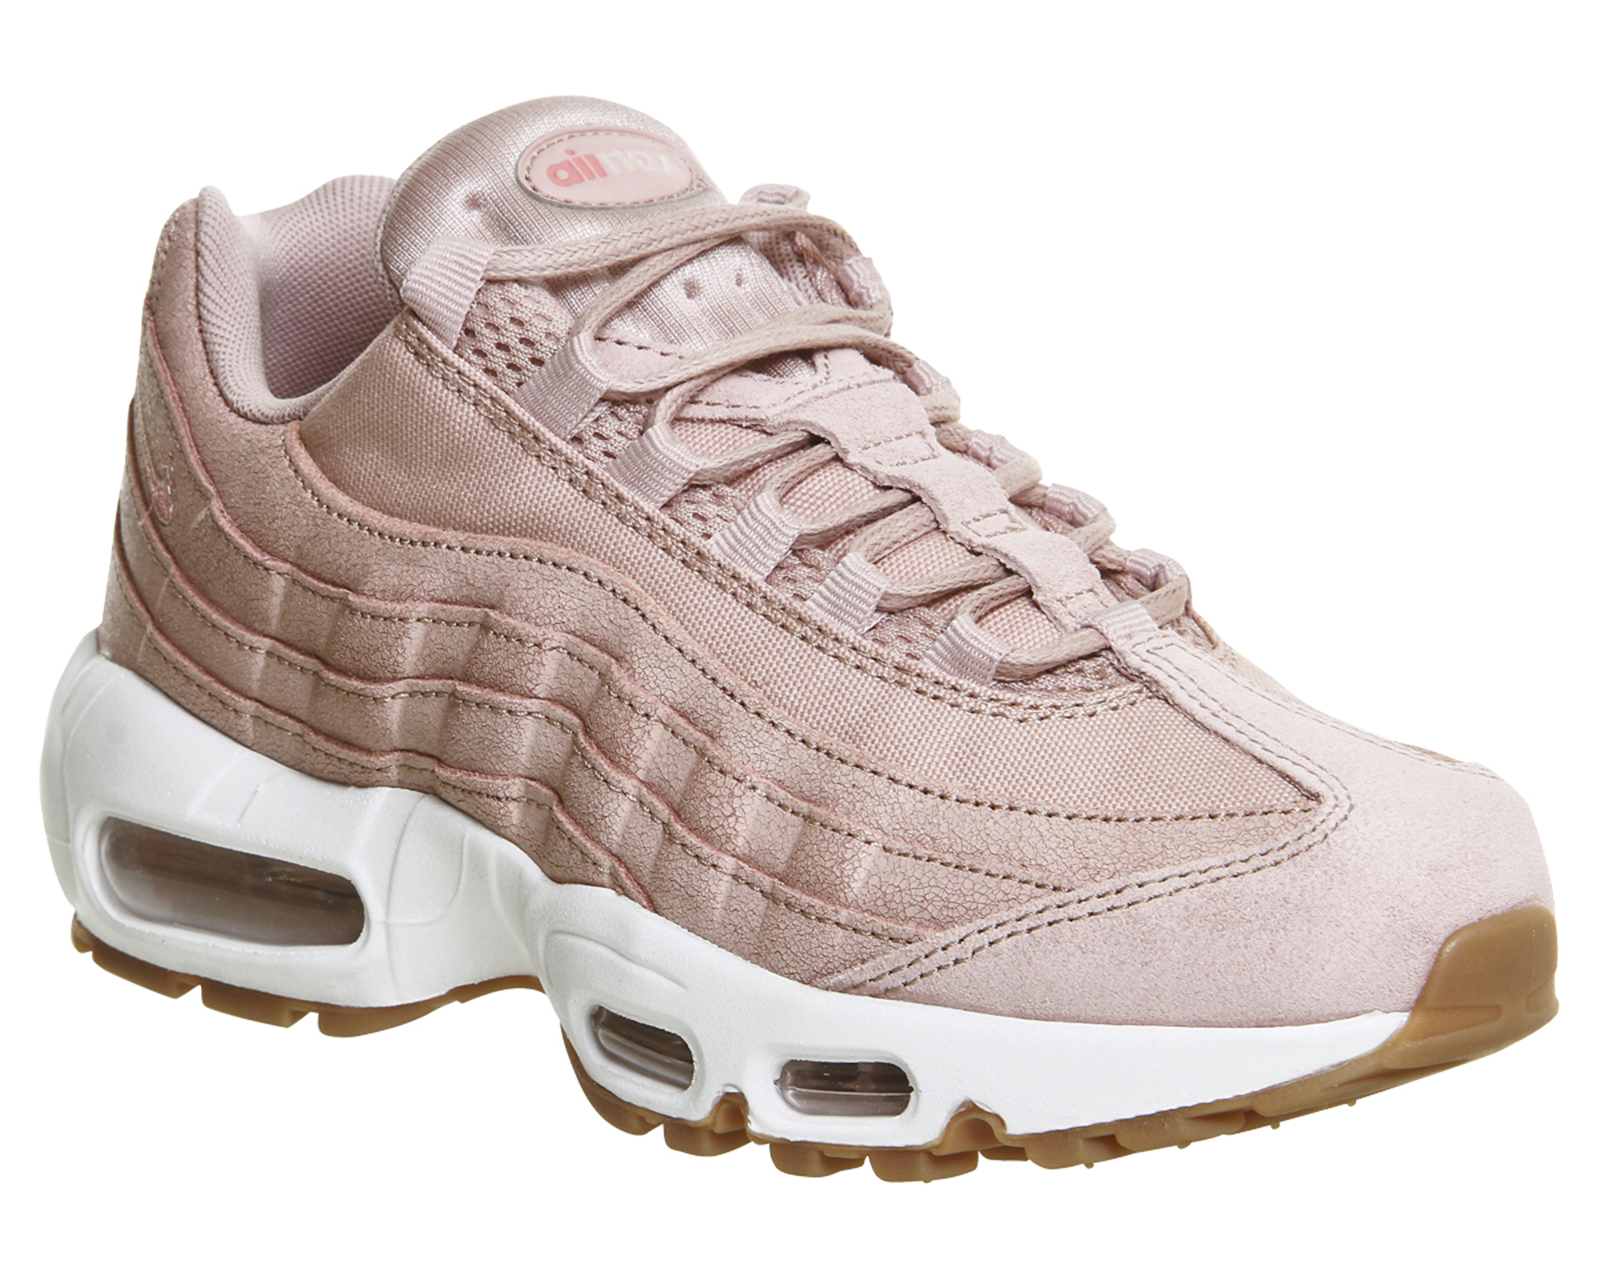 Nike Air Max 95 Pink Oxford Prm - Hers trainers